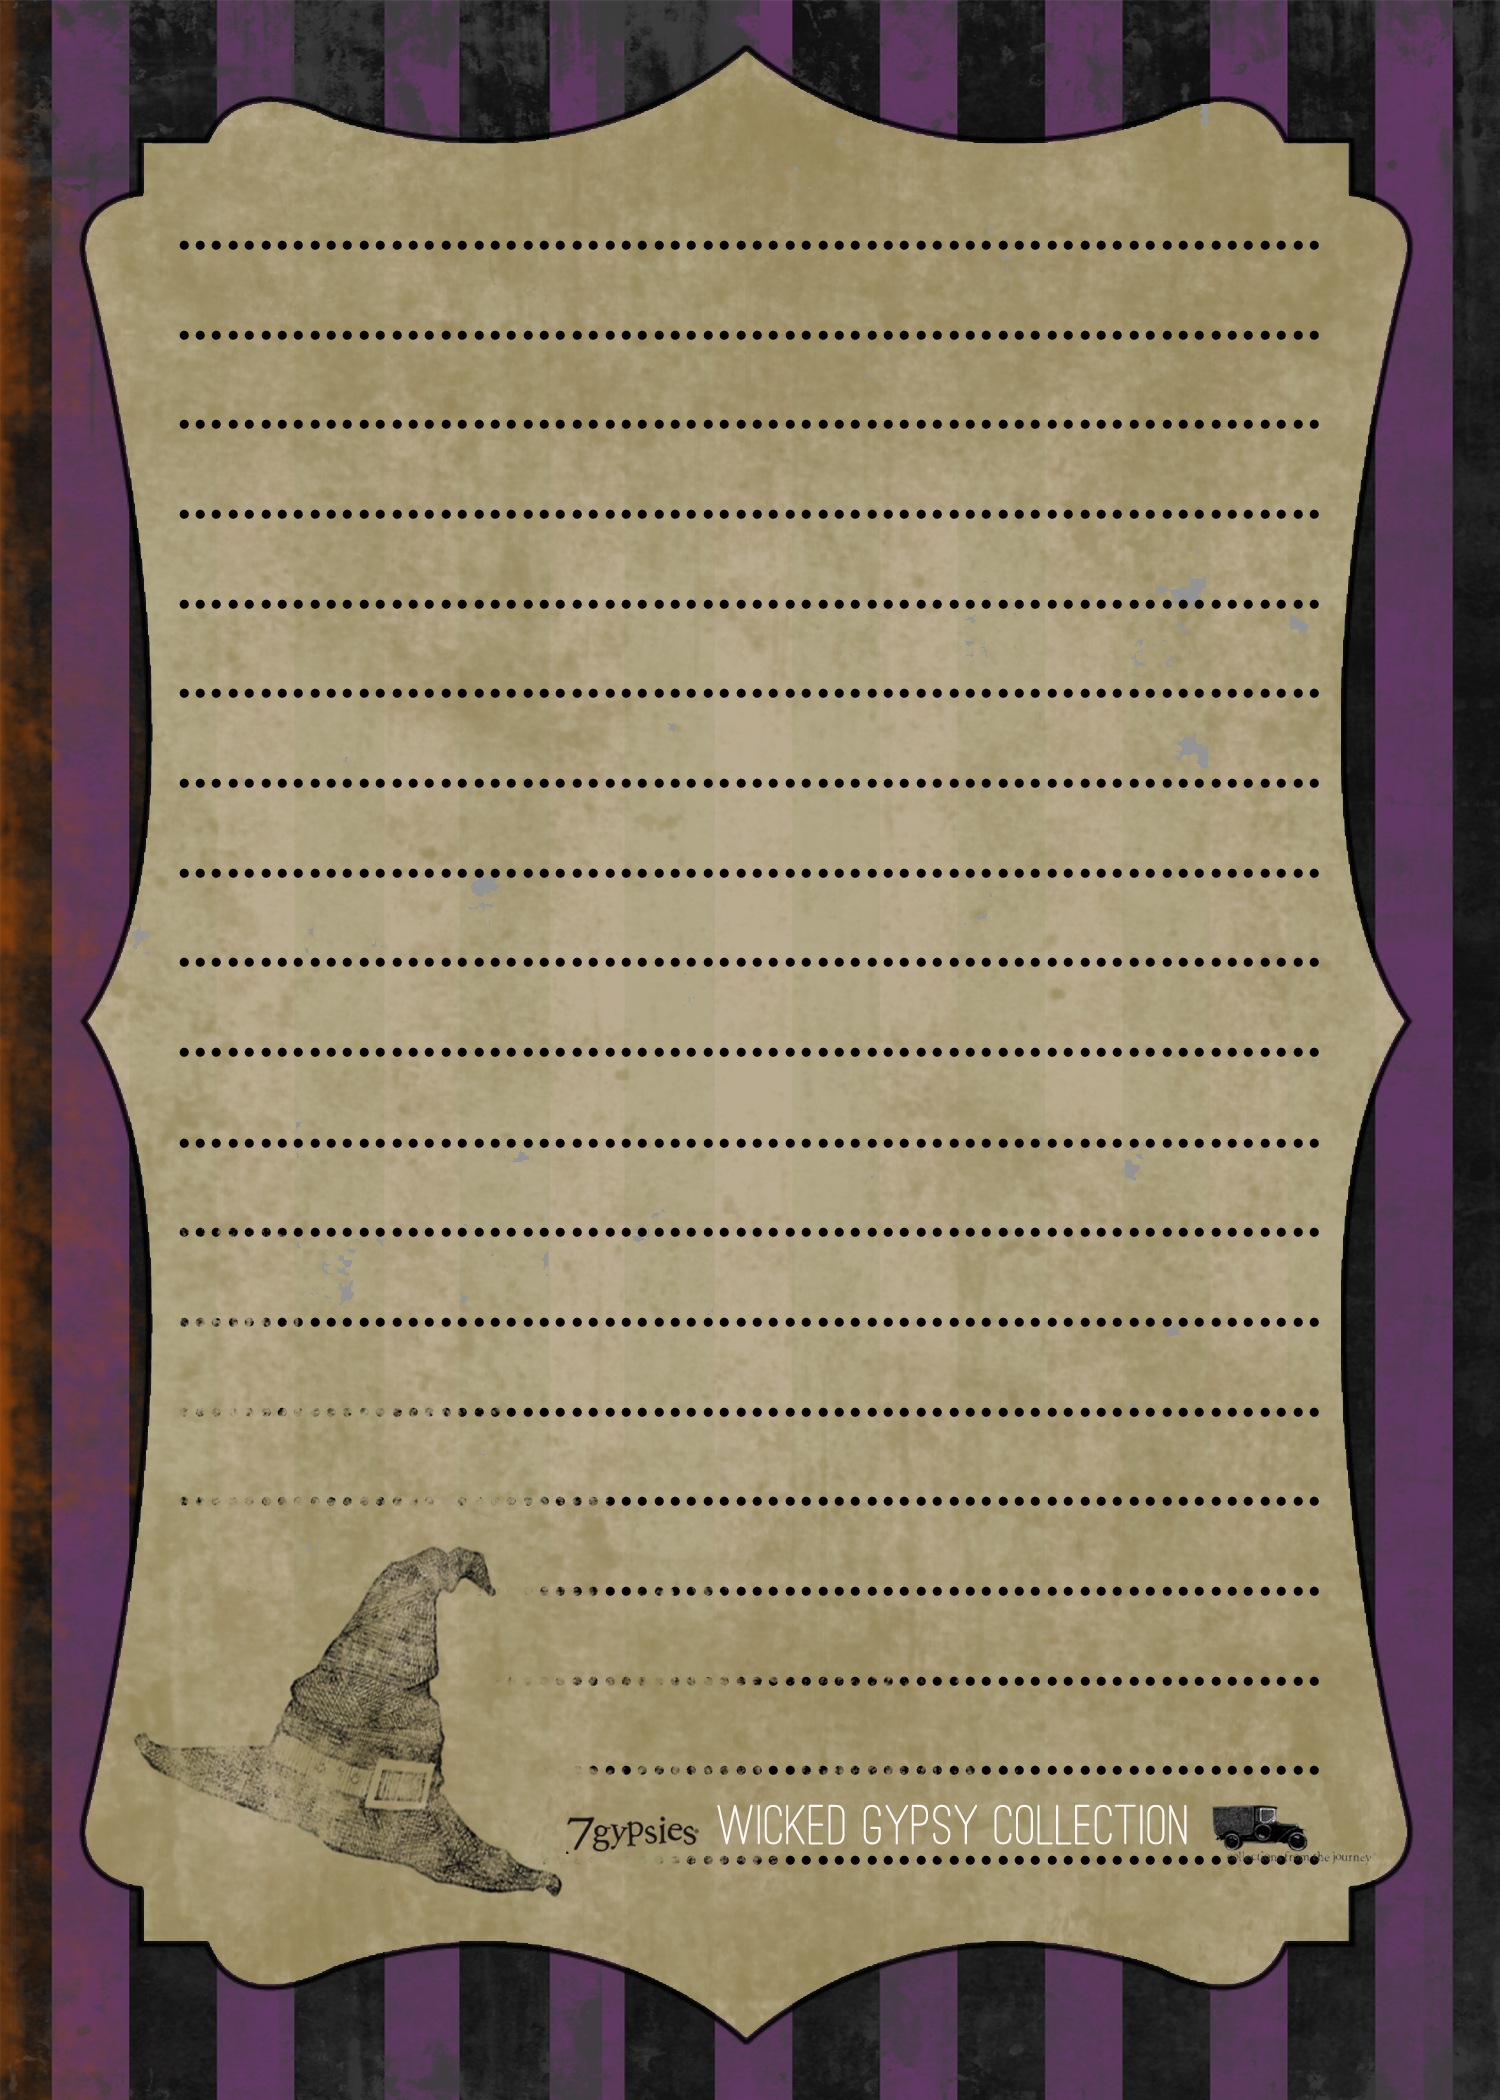 Wicked Gypsy Journal Pages (item #18015): Measuring exactly 5x7.